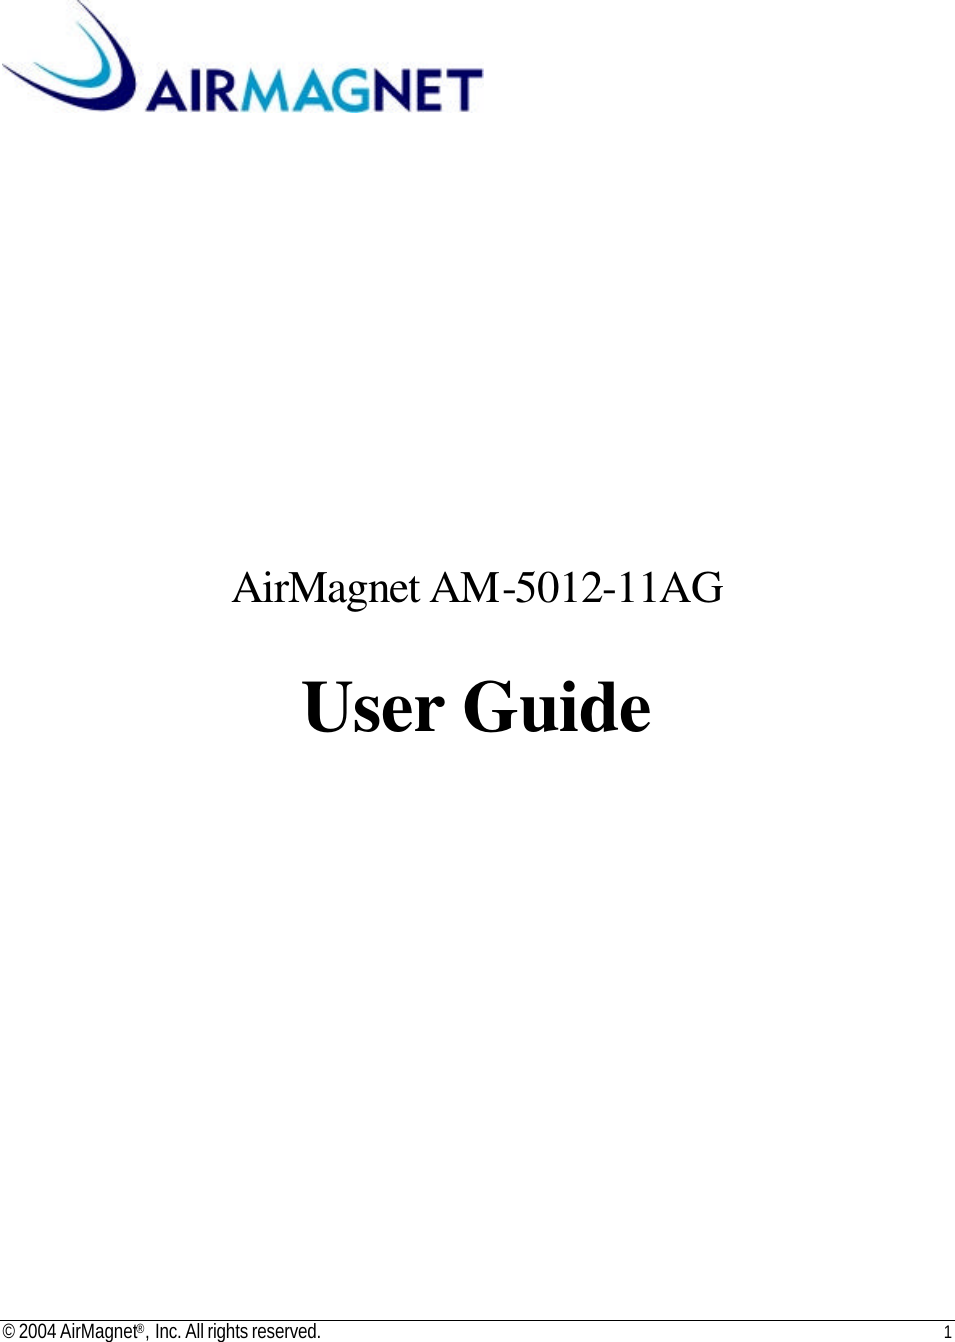 © 2004 AirMagnet®, Inc. All rights reserved. 1                      AirMagnet AM-5012-11AG  User Guide                     